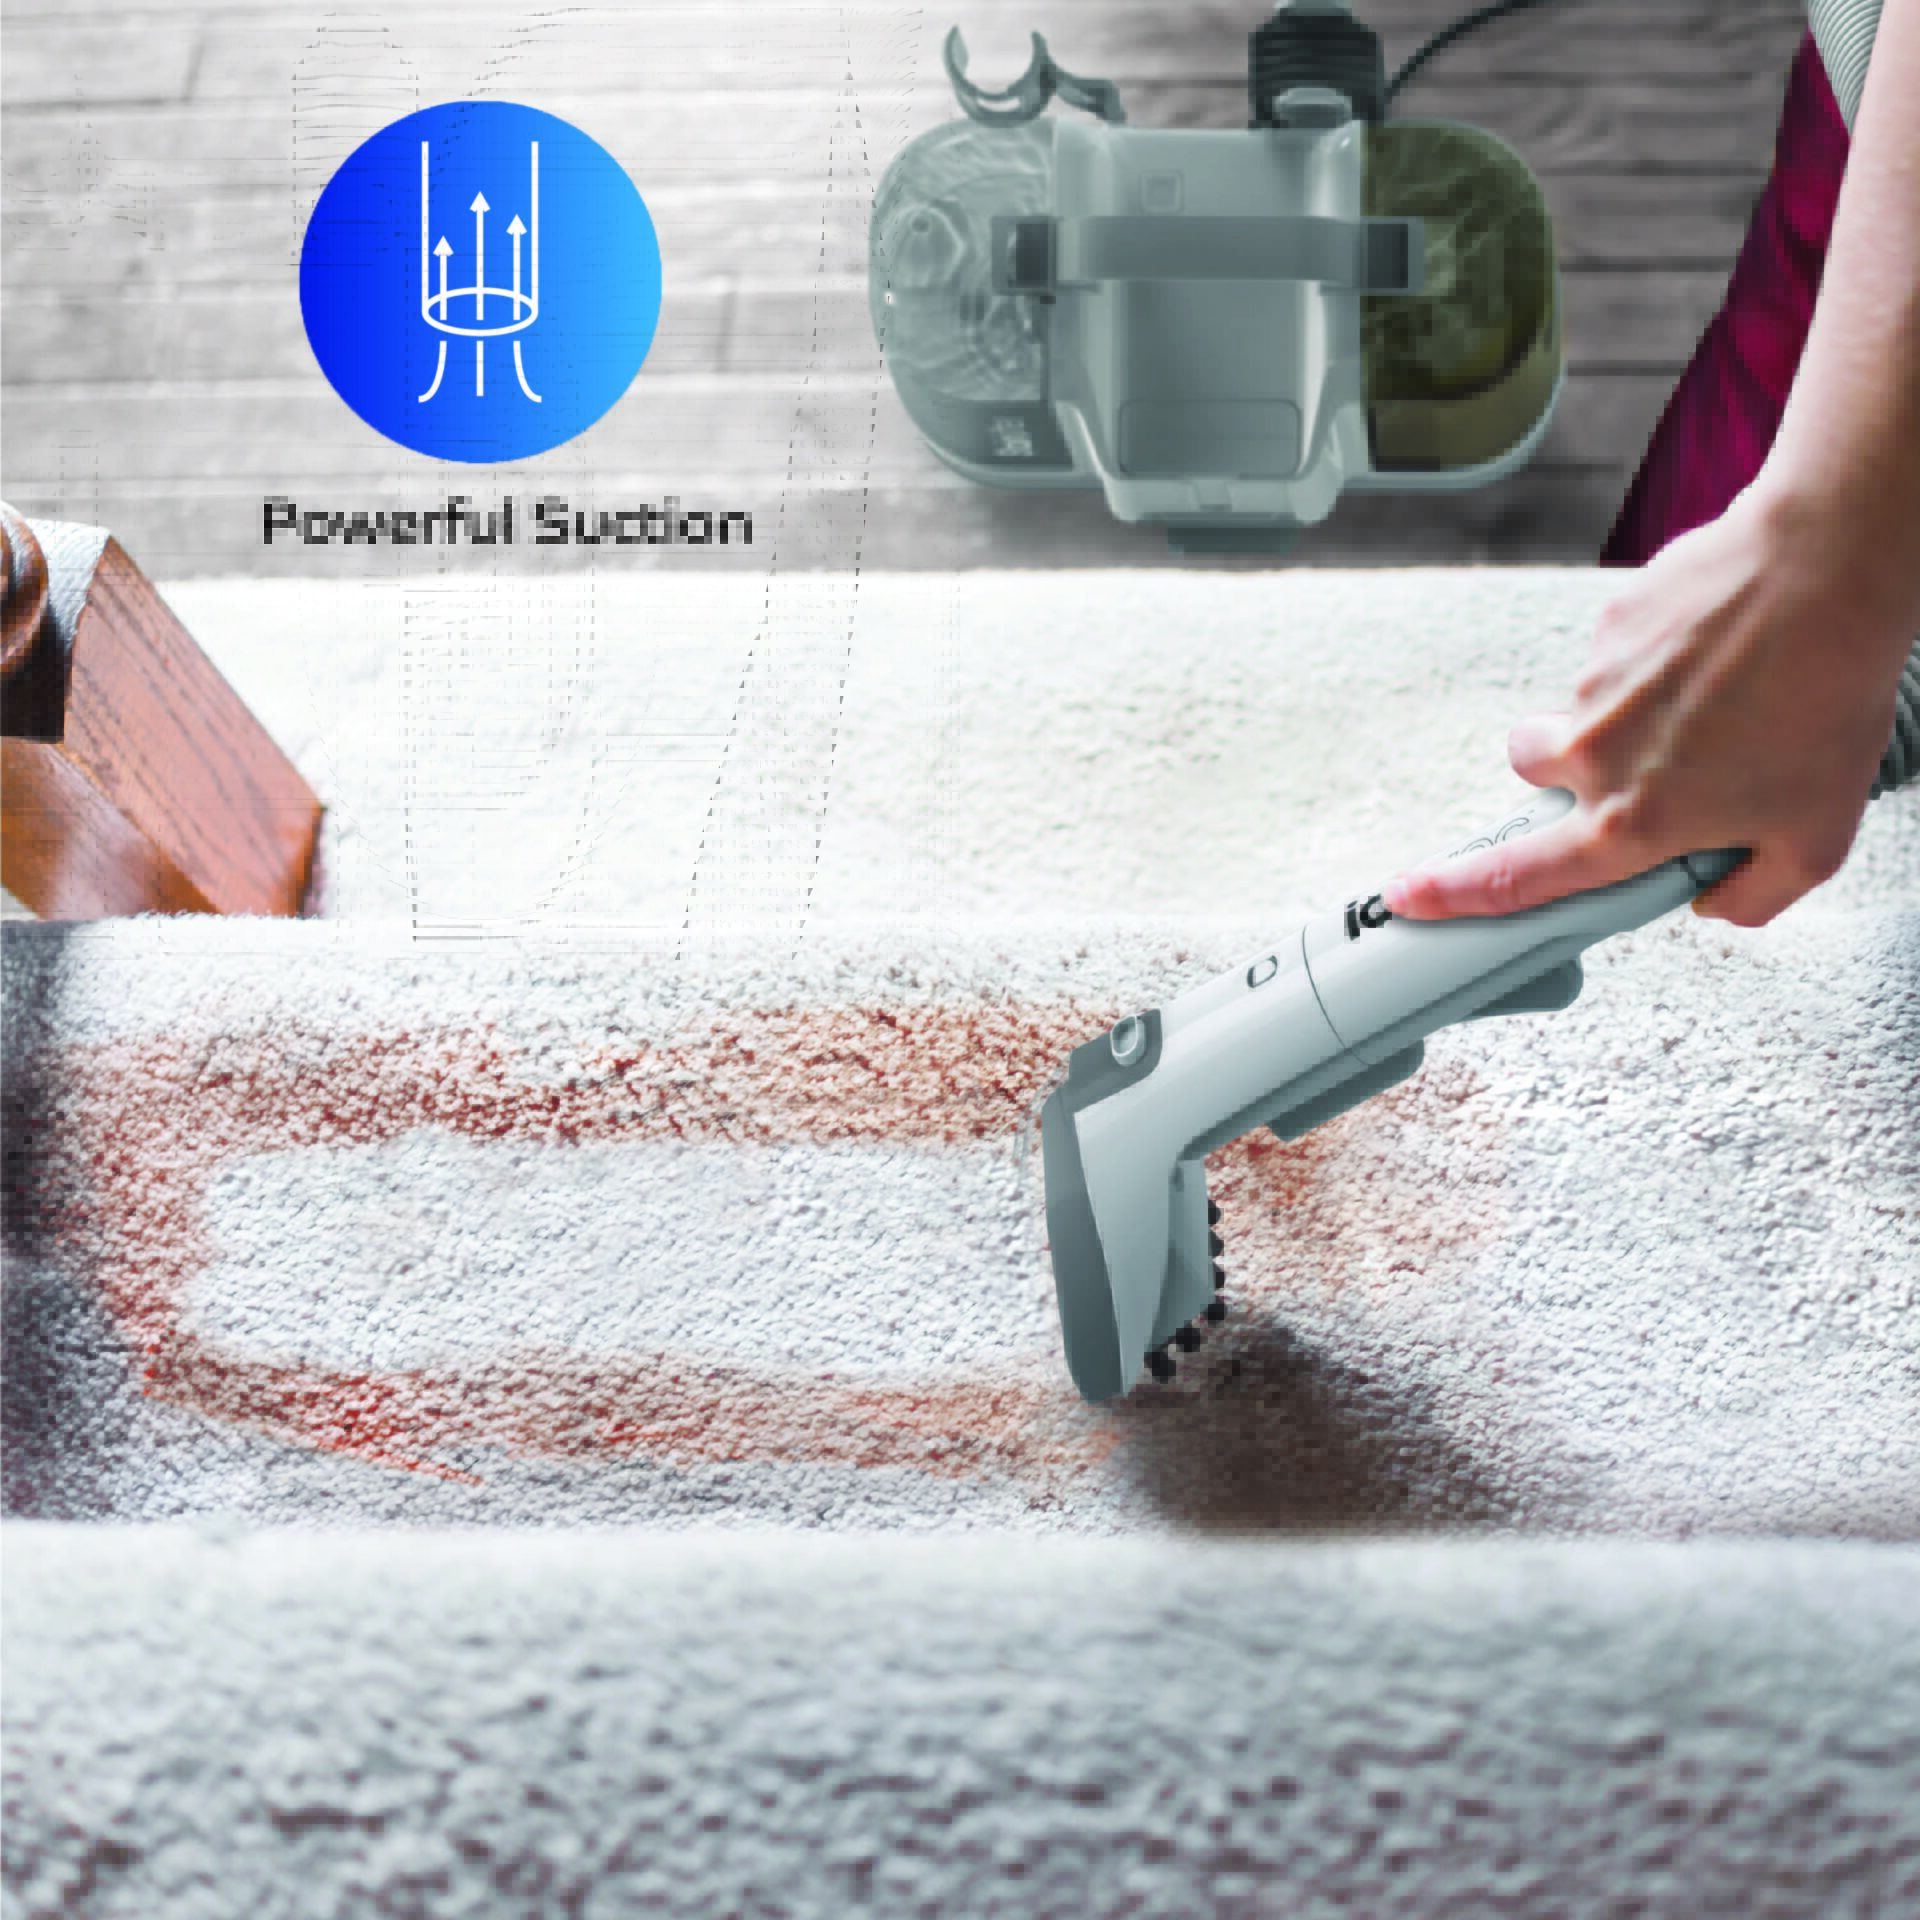 This internet-famous cordless scrubbing tool powers through even the most  stubborn grime with ease